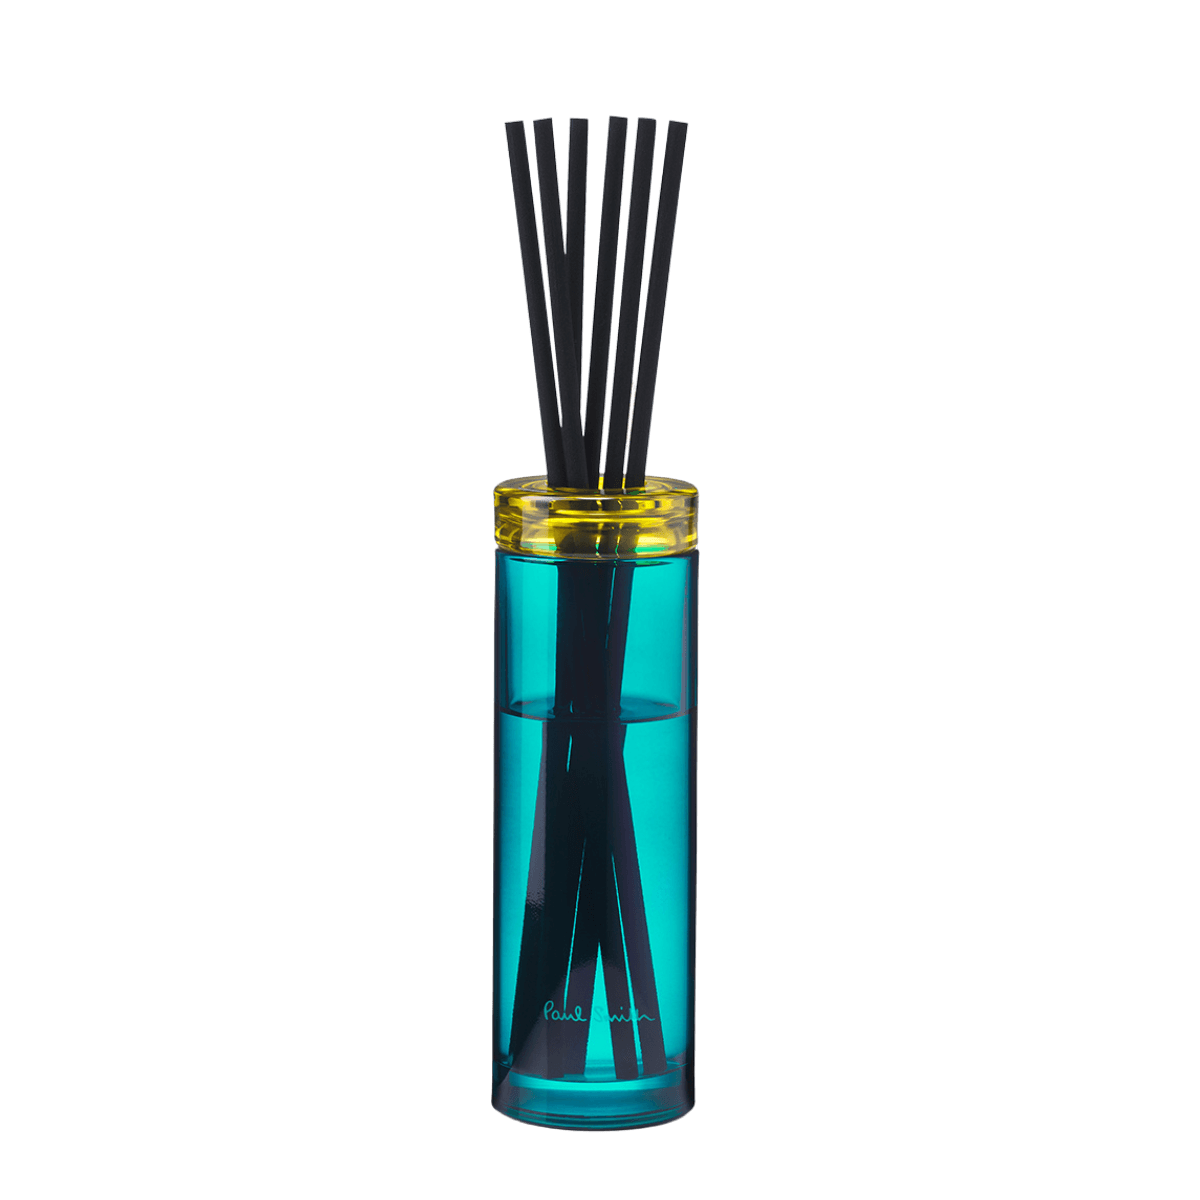 Image of Sunseeker reed diffuser by Paul Smith